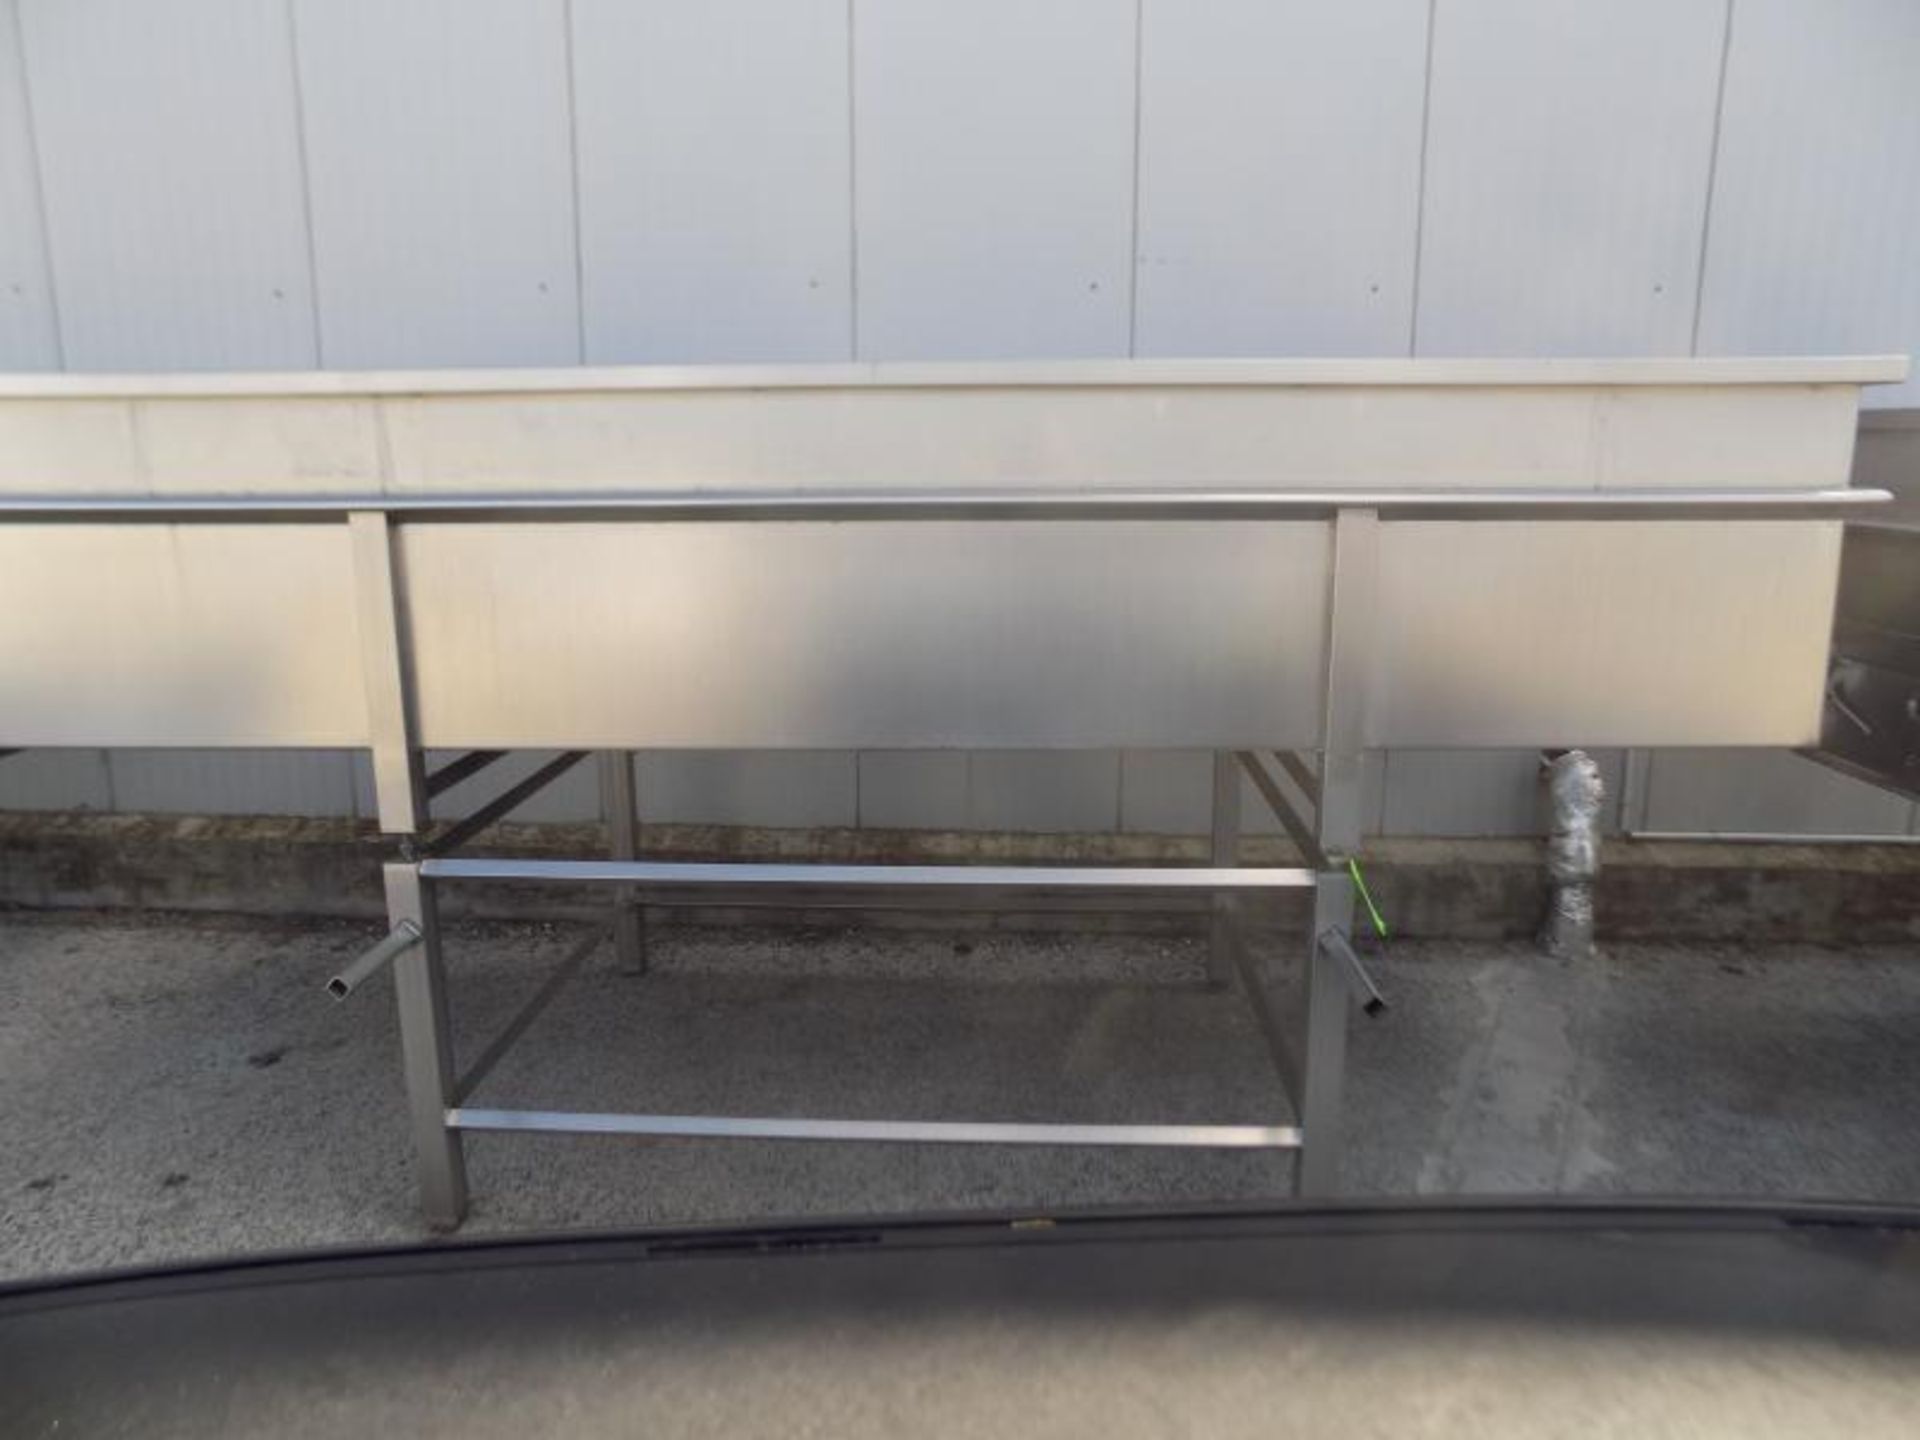 Aprox. 400 cm L x 80 cm H x 150 cm W 2-Compartment Open Top S/S Cheese Vat/Tank with Divider and (2)